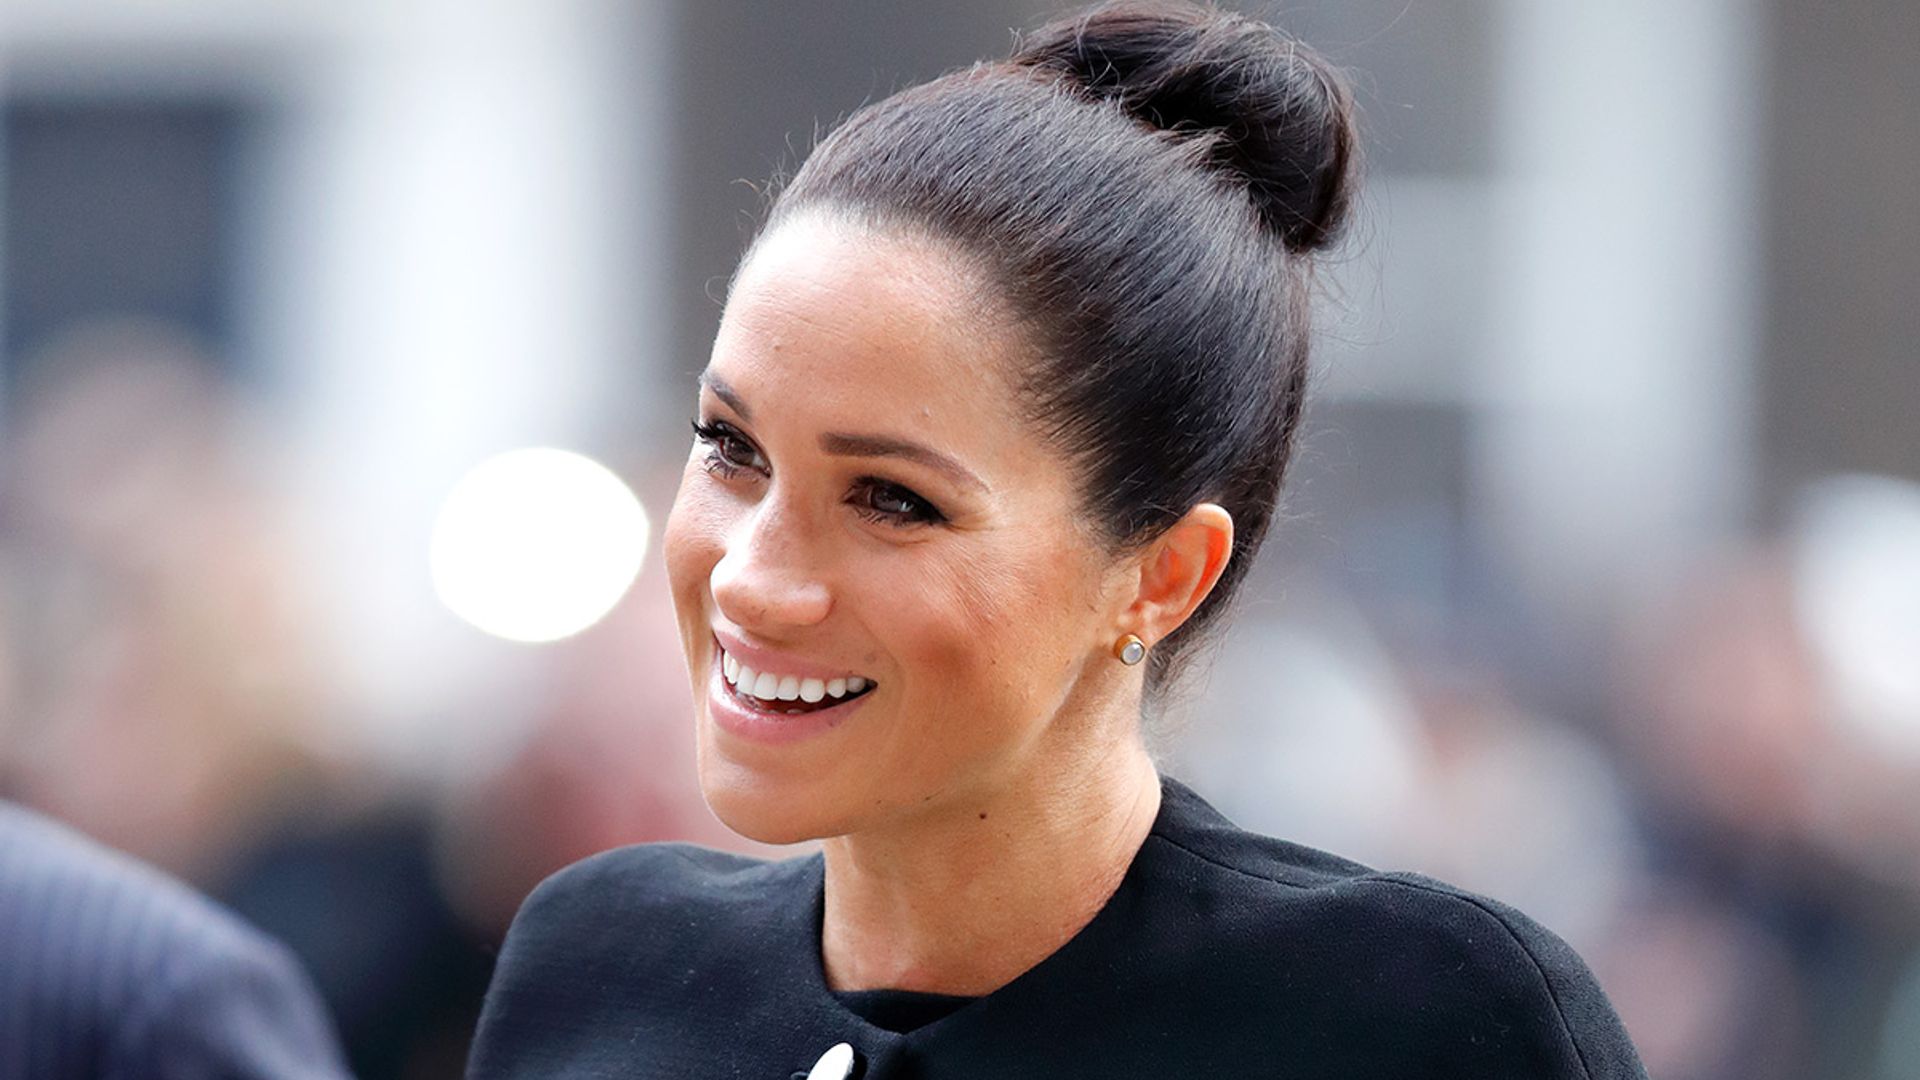 Fellow Princess shows her support for Meghan Markle